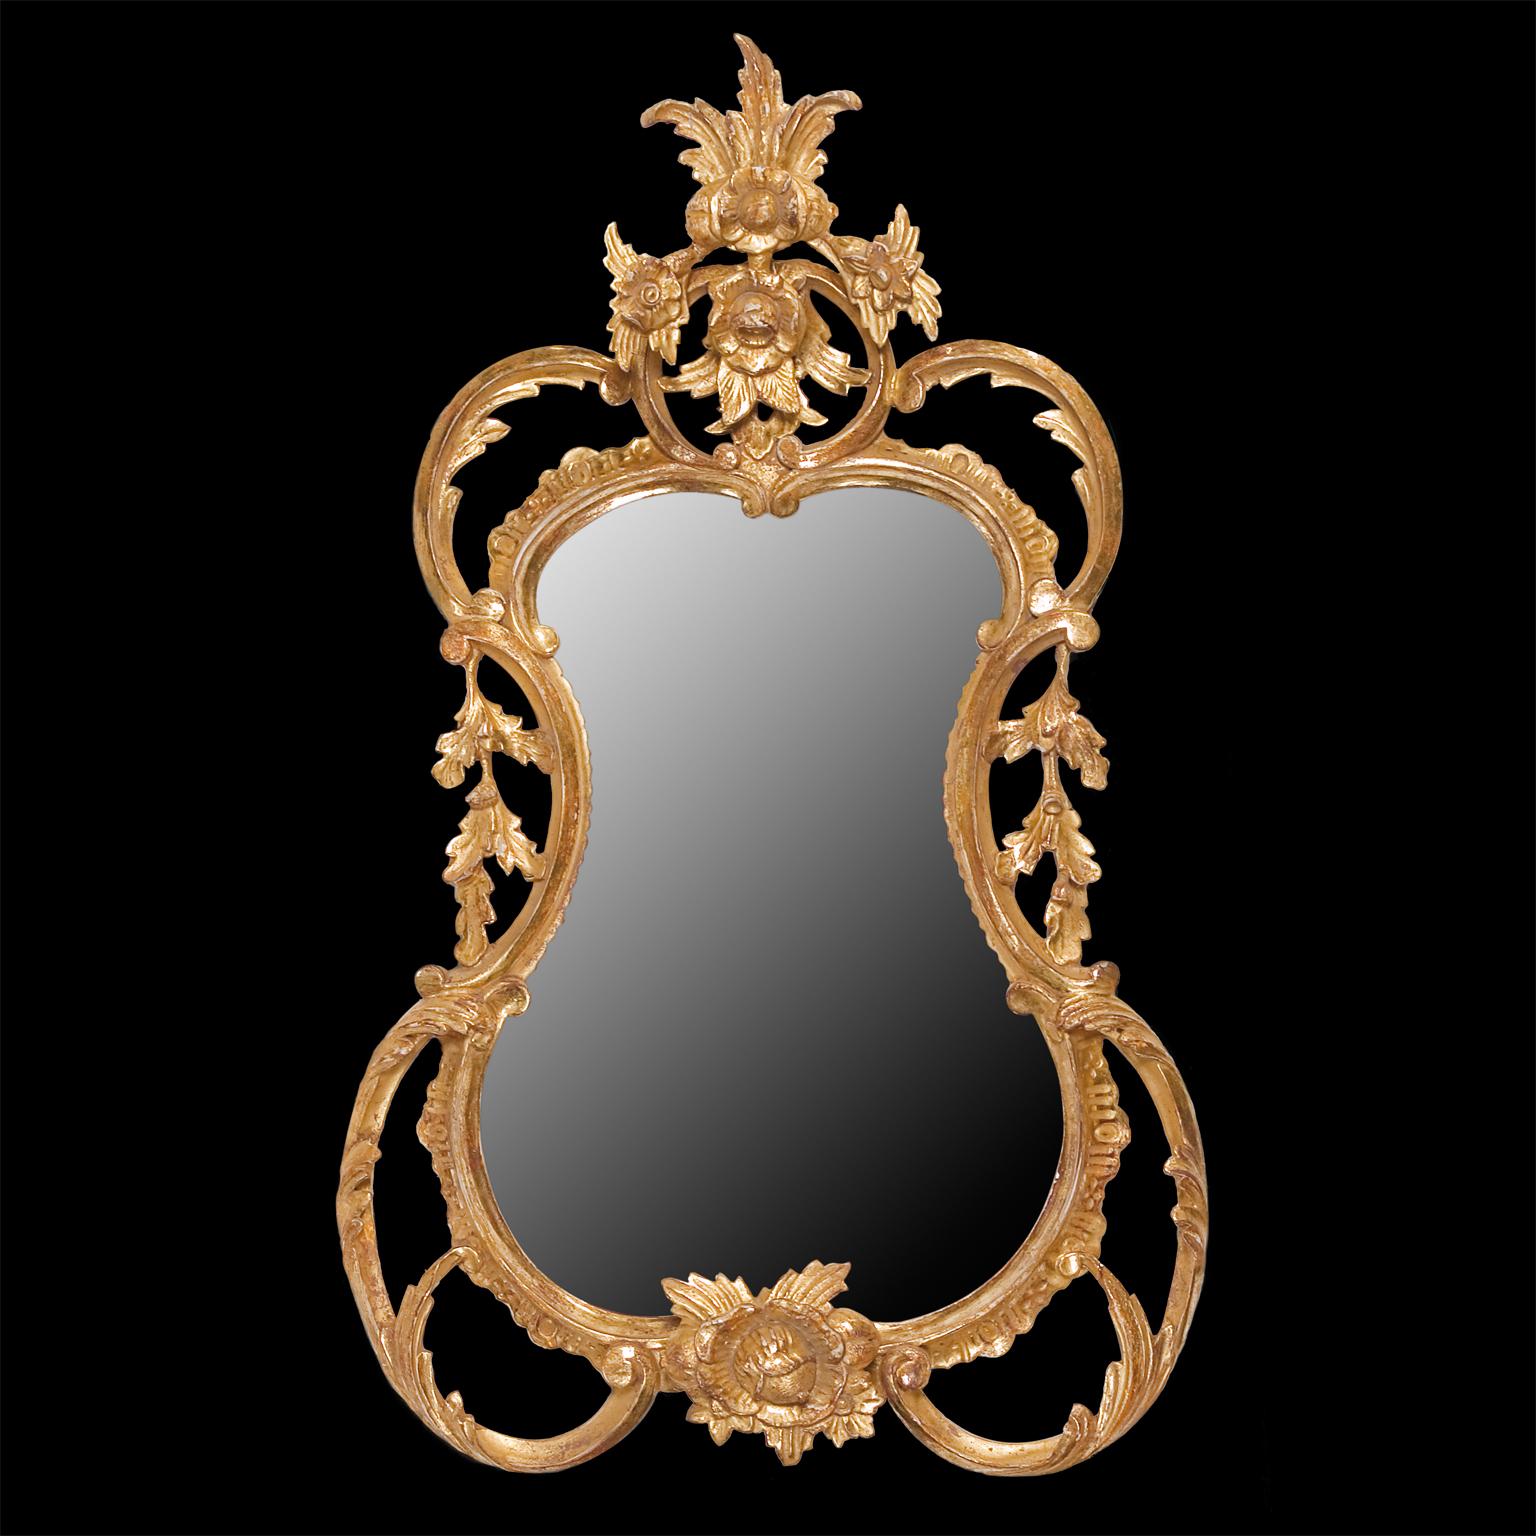 A small carved giltwood looking glass mirror in a swirling Rococo style frame incorporating many of the mid-18th century designers repertoire of vigorous leaf carved scrolls, leaves and flowers.

We are currently working to a 30-36 week lead time.